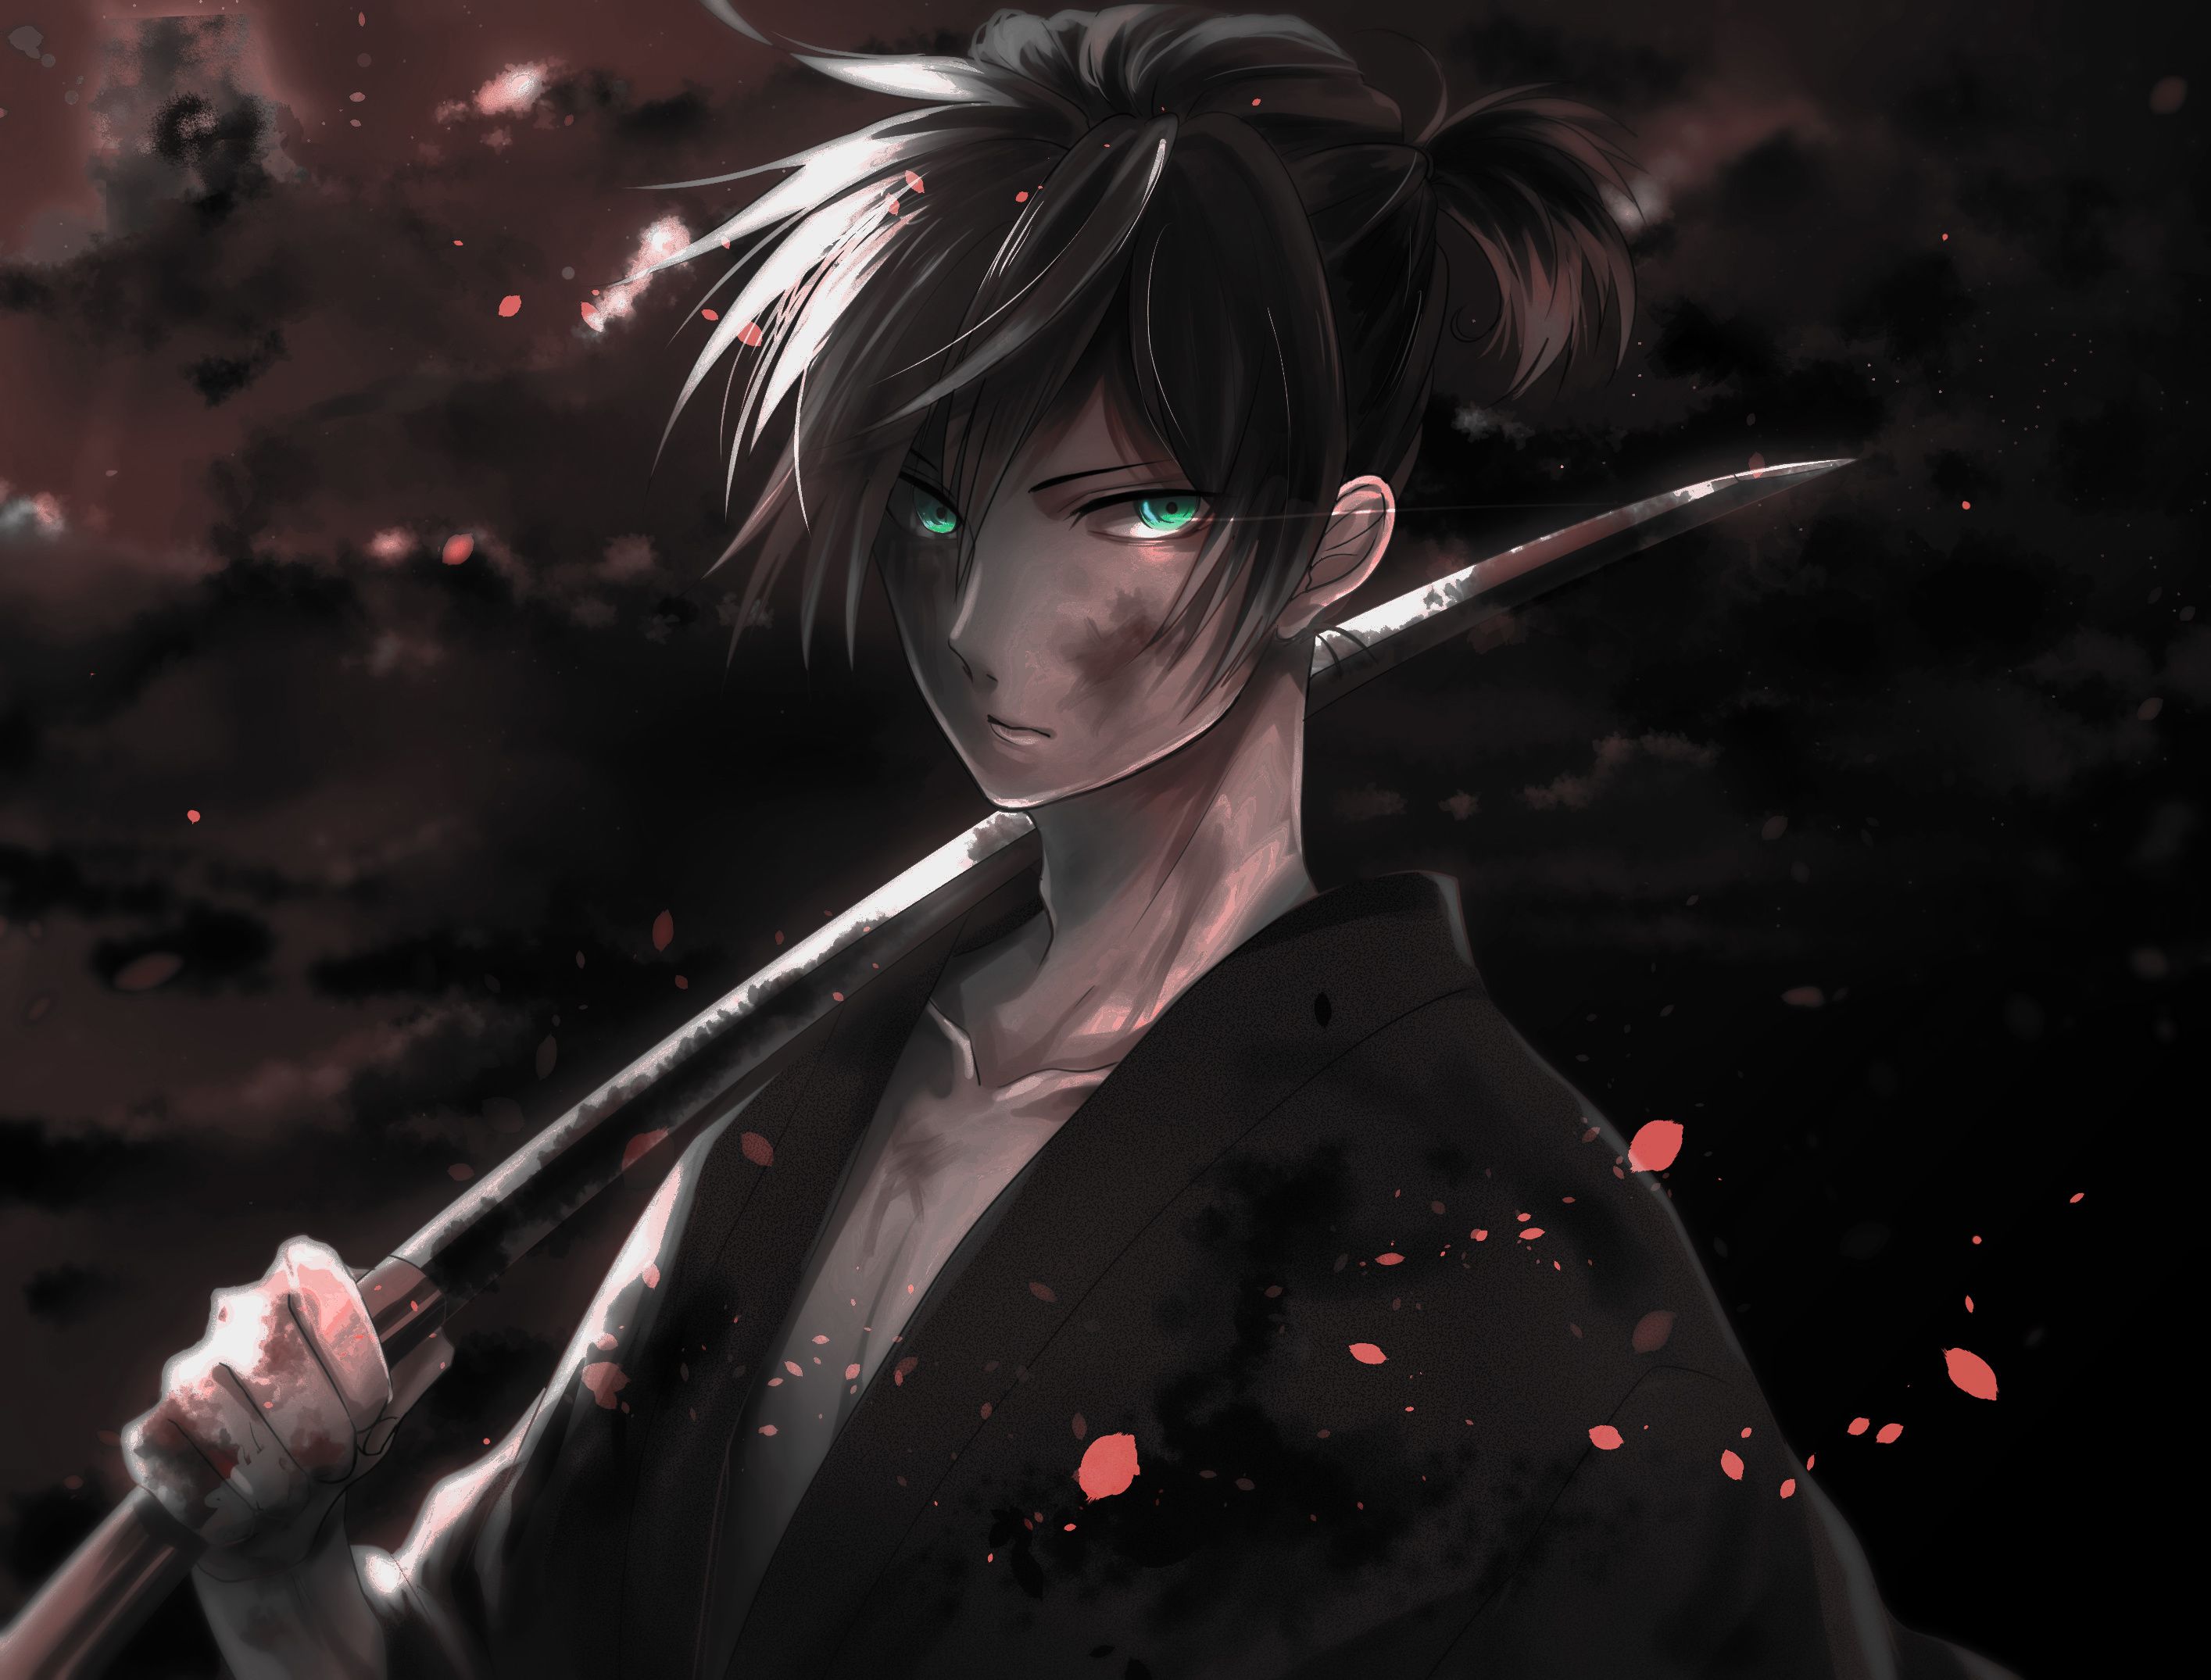 4. Yato from Noragami - wide 6